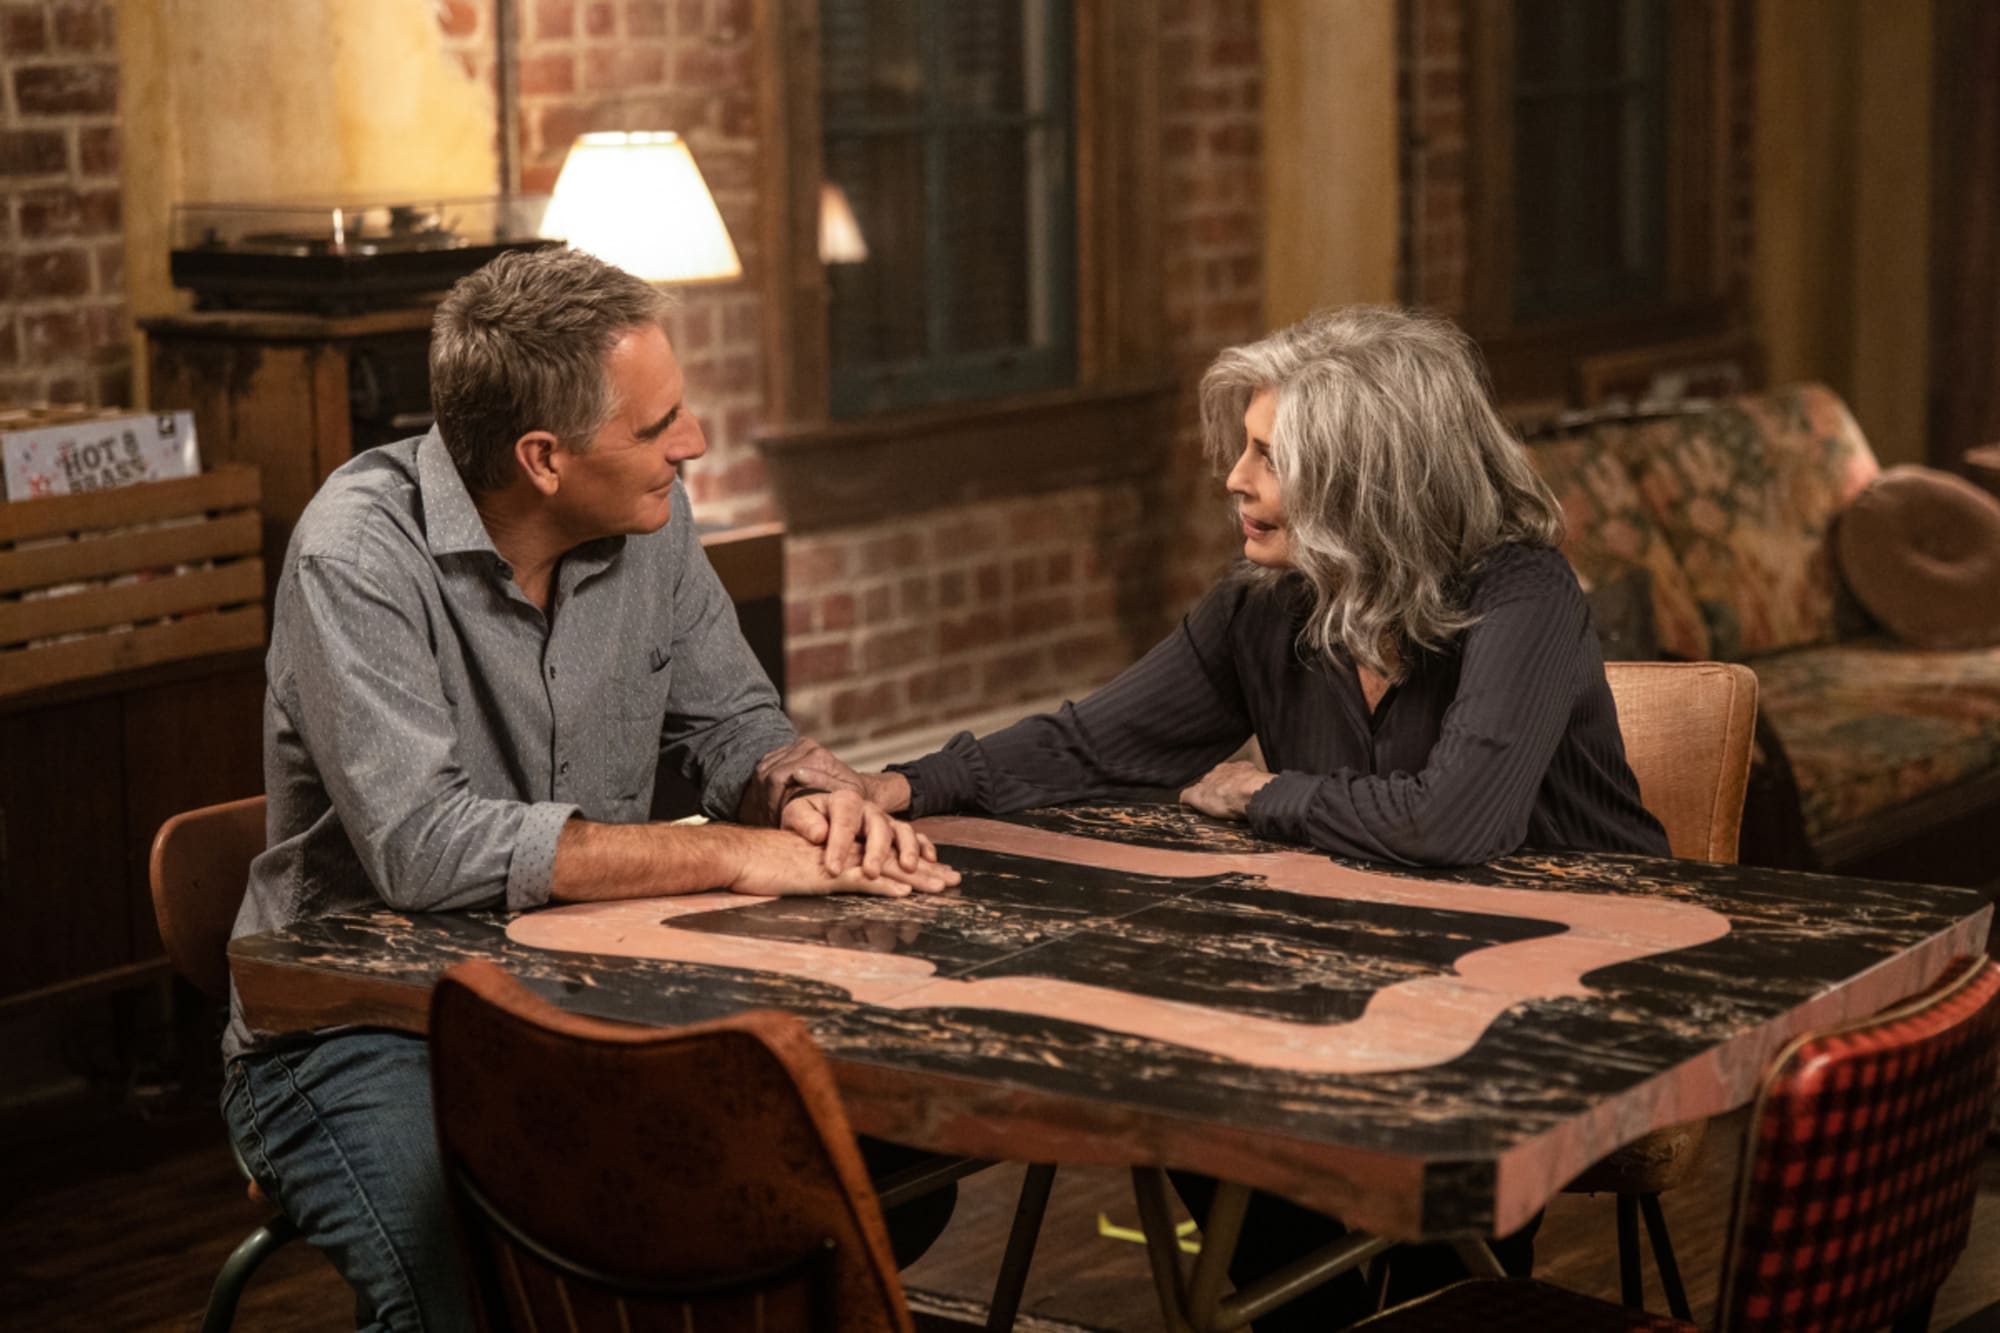 NCIS: New Orleans Season 6, Episode 15 and Episode 16 synopses